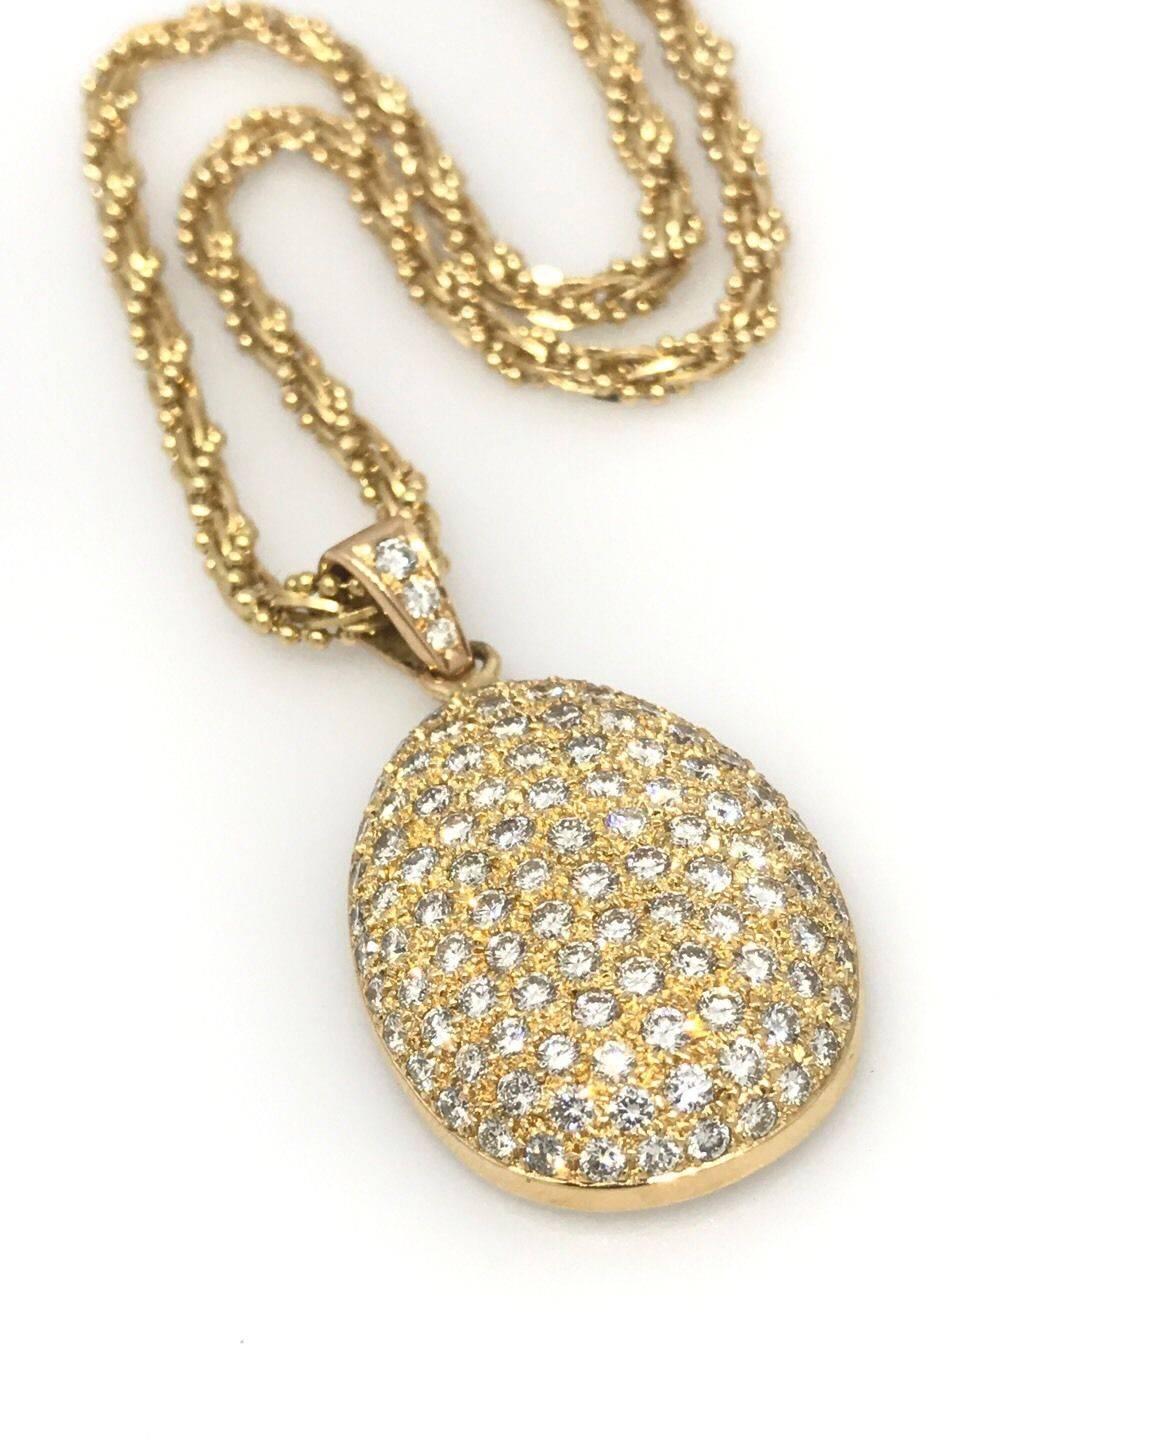 Pave diamond teardrop pendant in 18k yellow gold hanging from fancy beaded/link twist chain.  There are 3.78 cts in round brilliant diamonds, VS clarity, G-H color. Diamond Bale. Chain measures 16.5 in long.
Both pieces weigh 50 grams. Marks: 750,